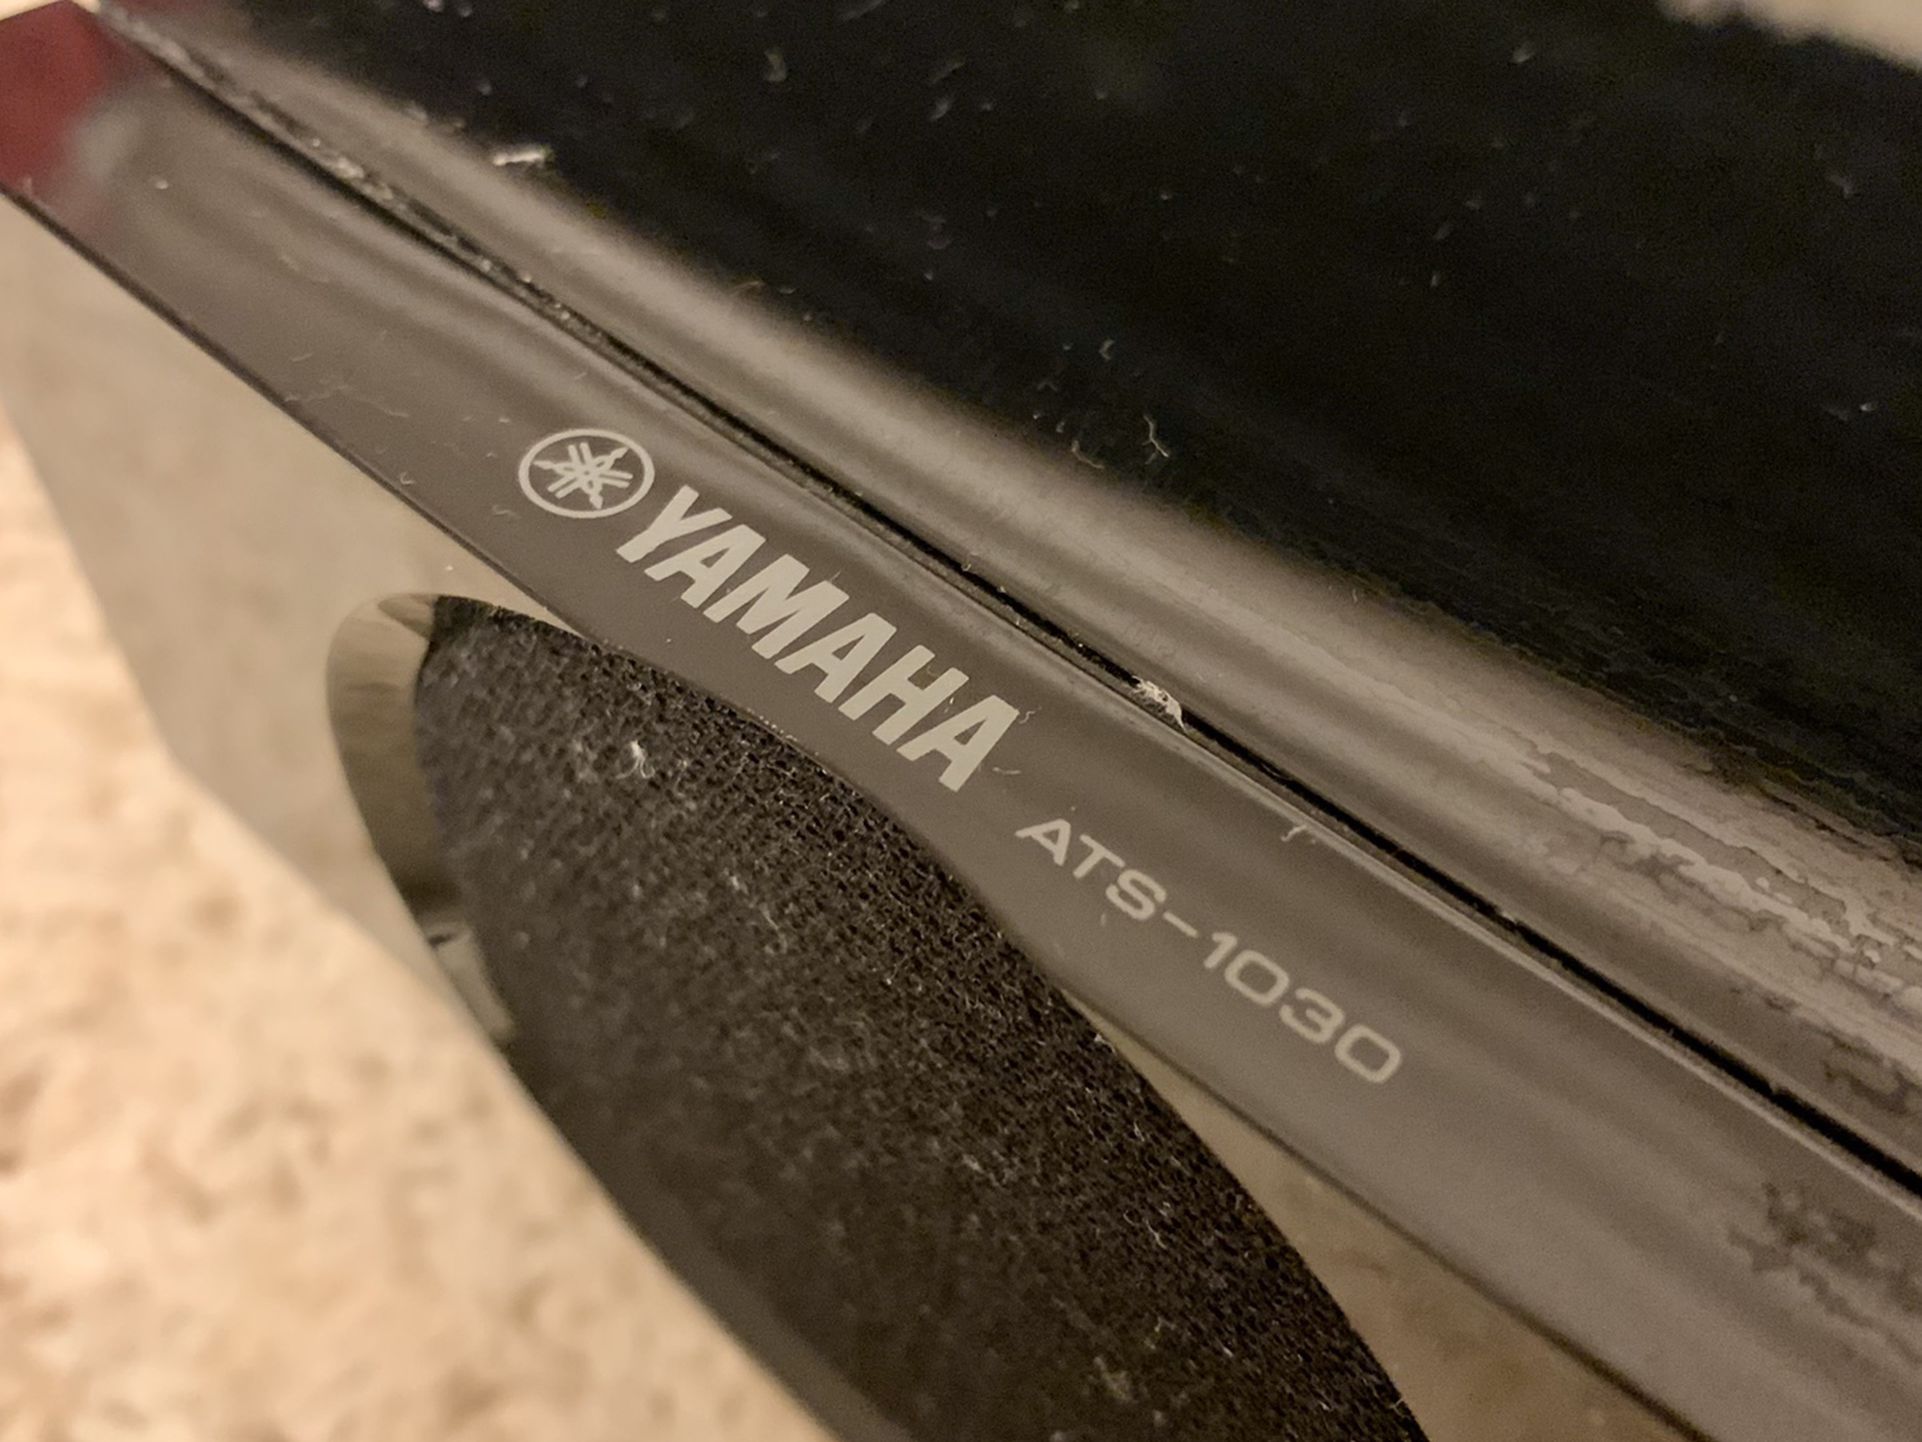 Yamaha ATS-1030 Sound Bar with Dual Built-in Subwoofers and Bluetooth